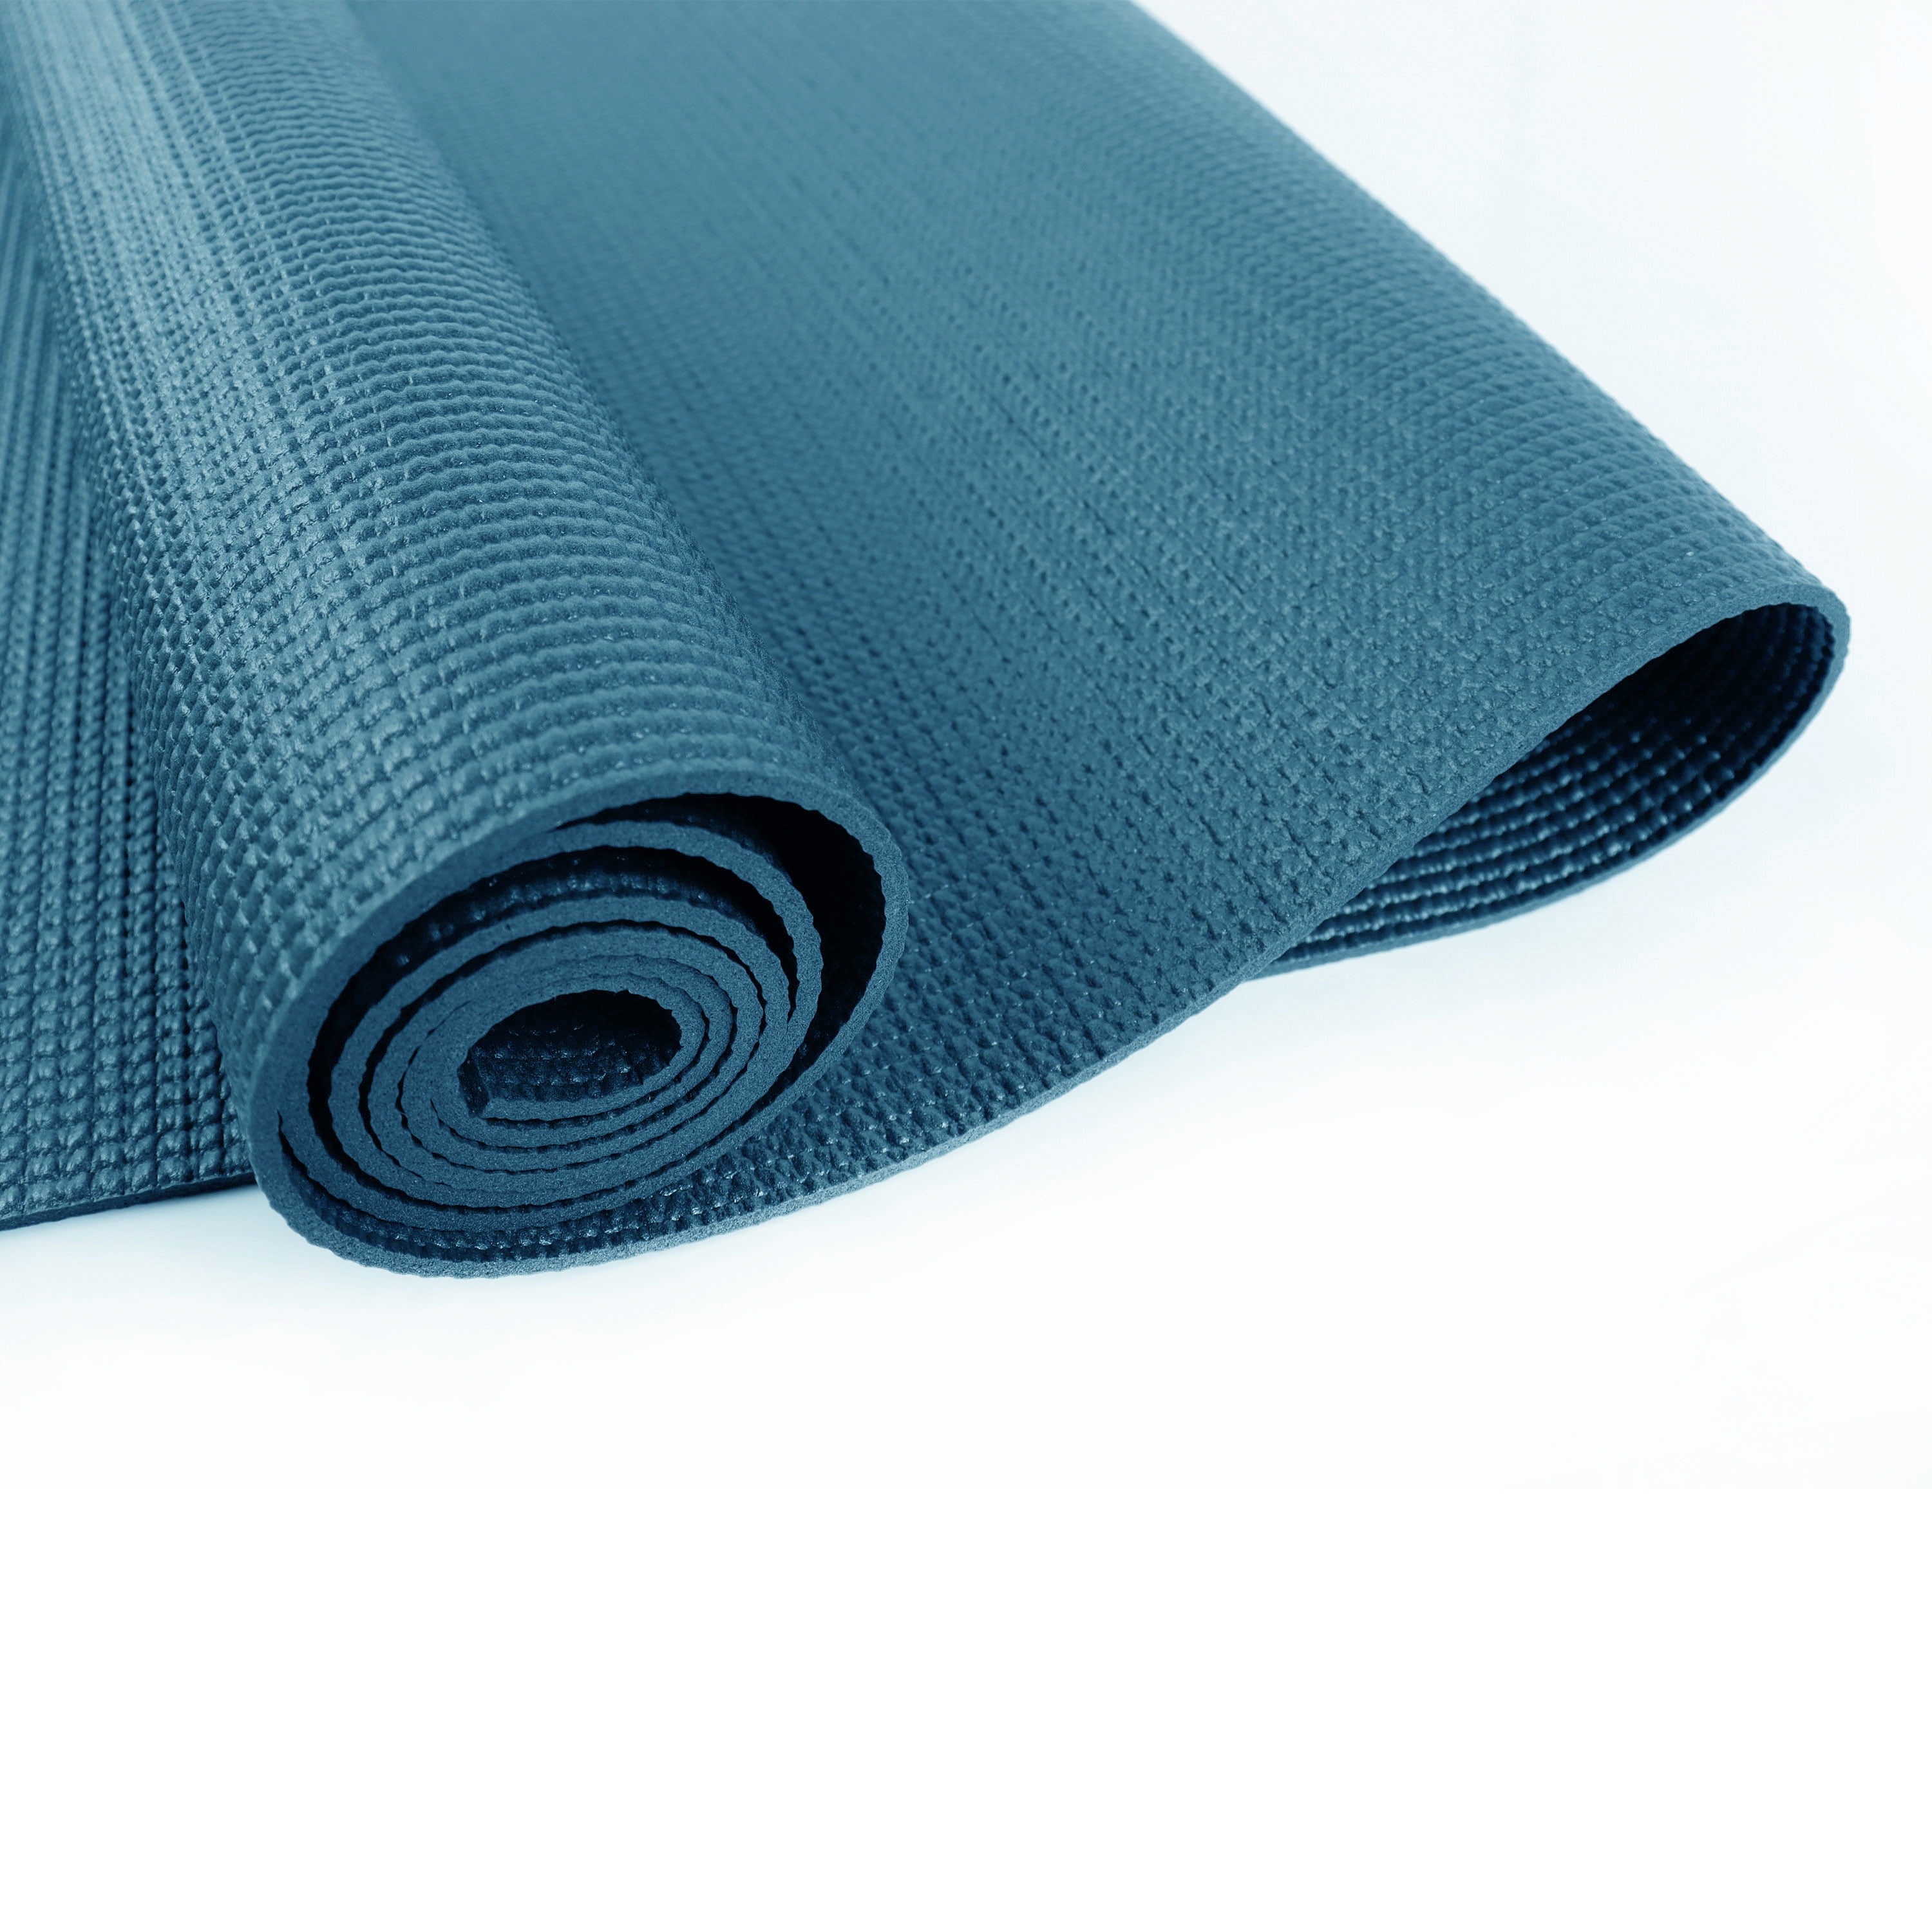 Teseo oriental Conquistar Athletic Works PVC Yoga Mat, 3mm, Real Teal, 68inx24in, Non Slip,  Cushioning for Support and Stability - Walmart.com